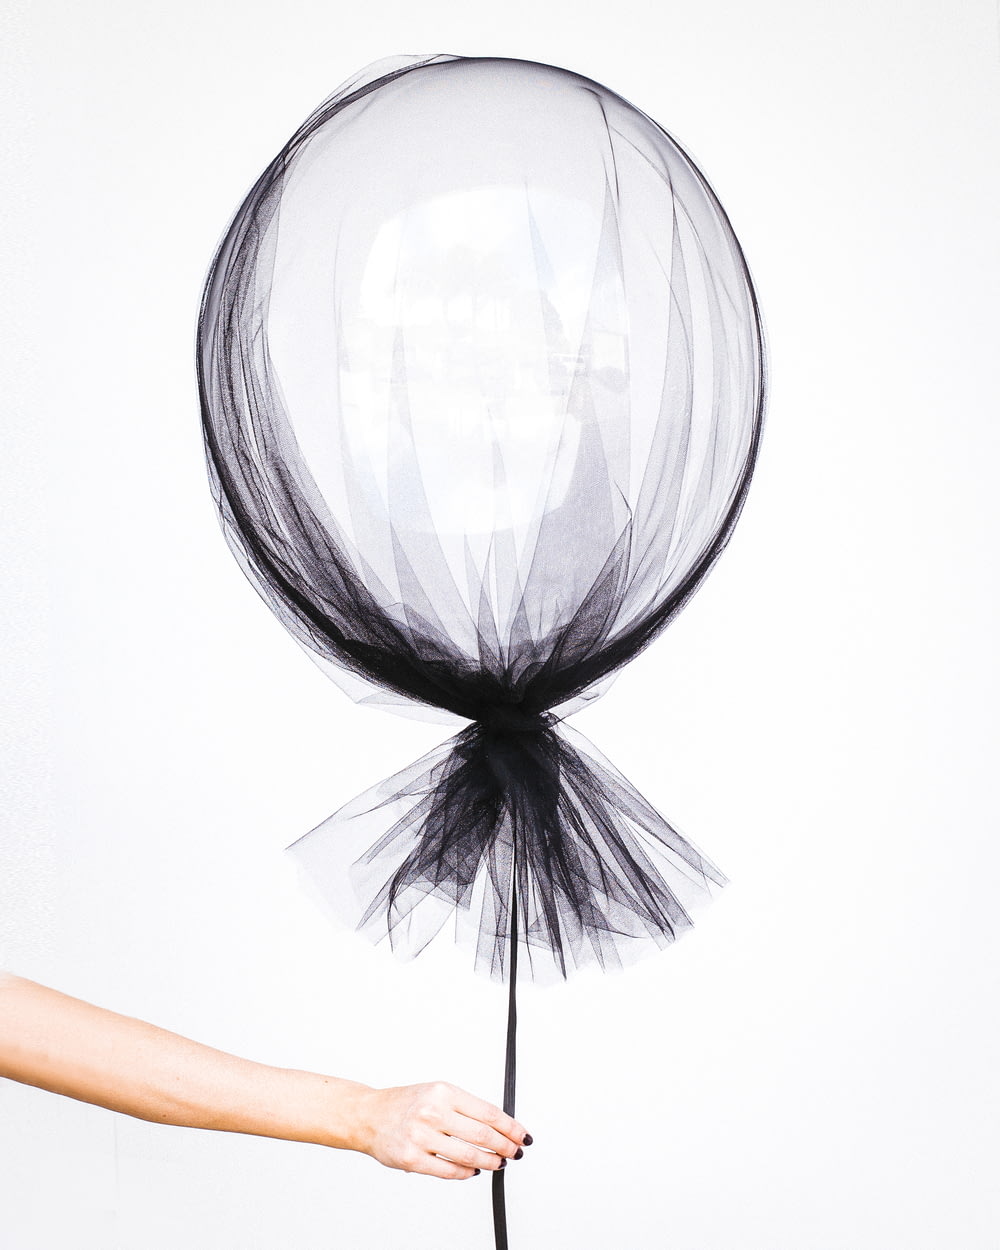 person holding black balloon decal